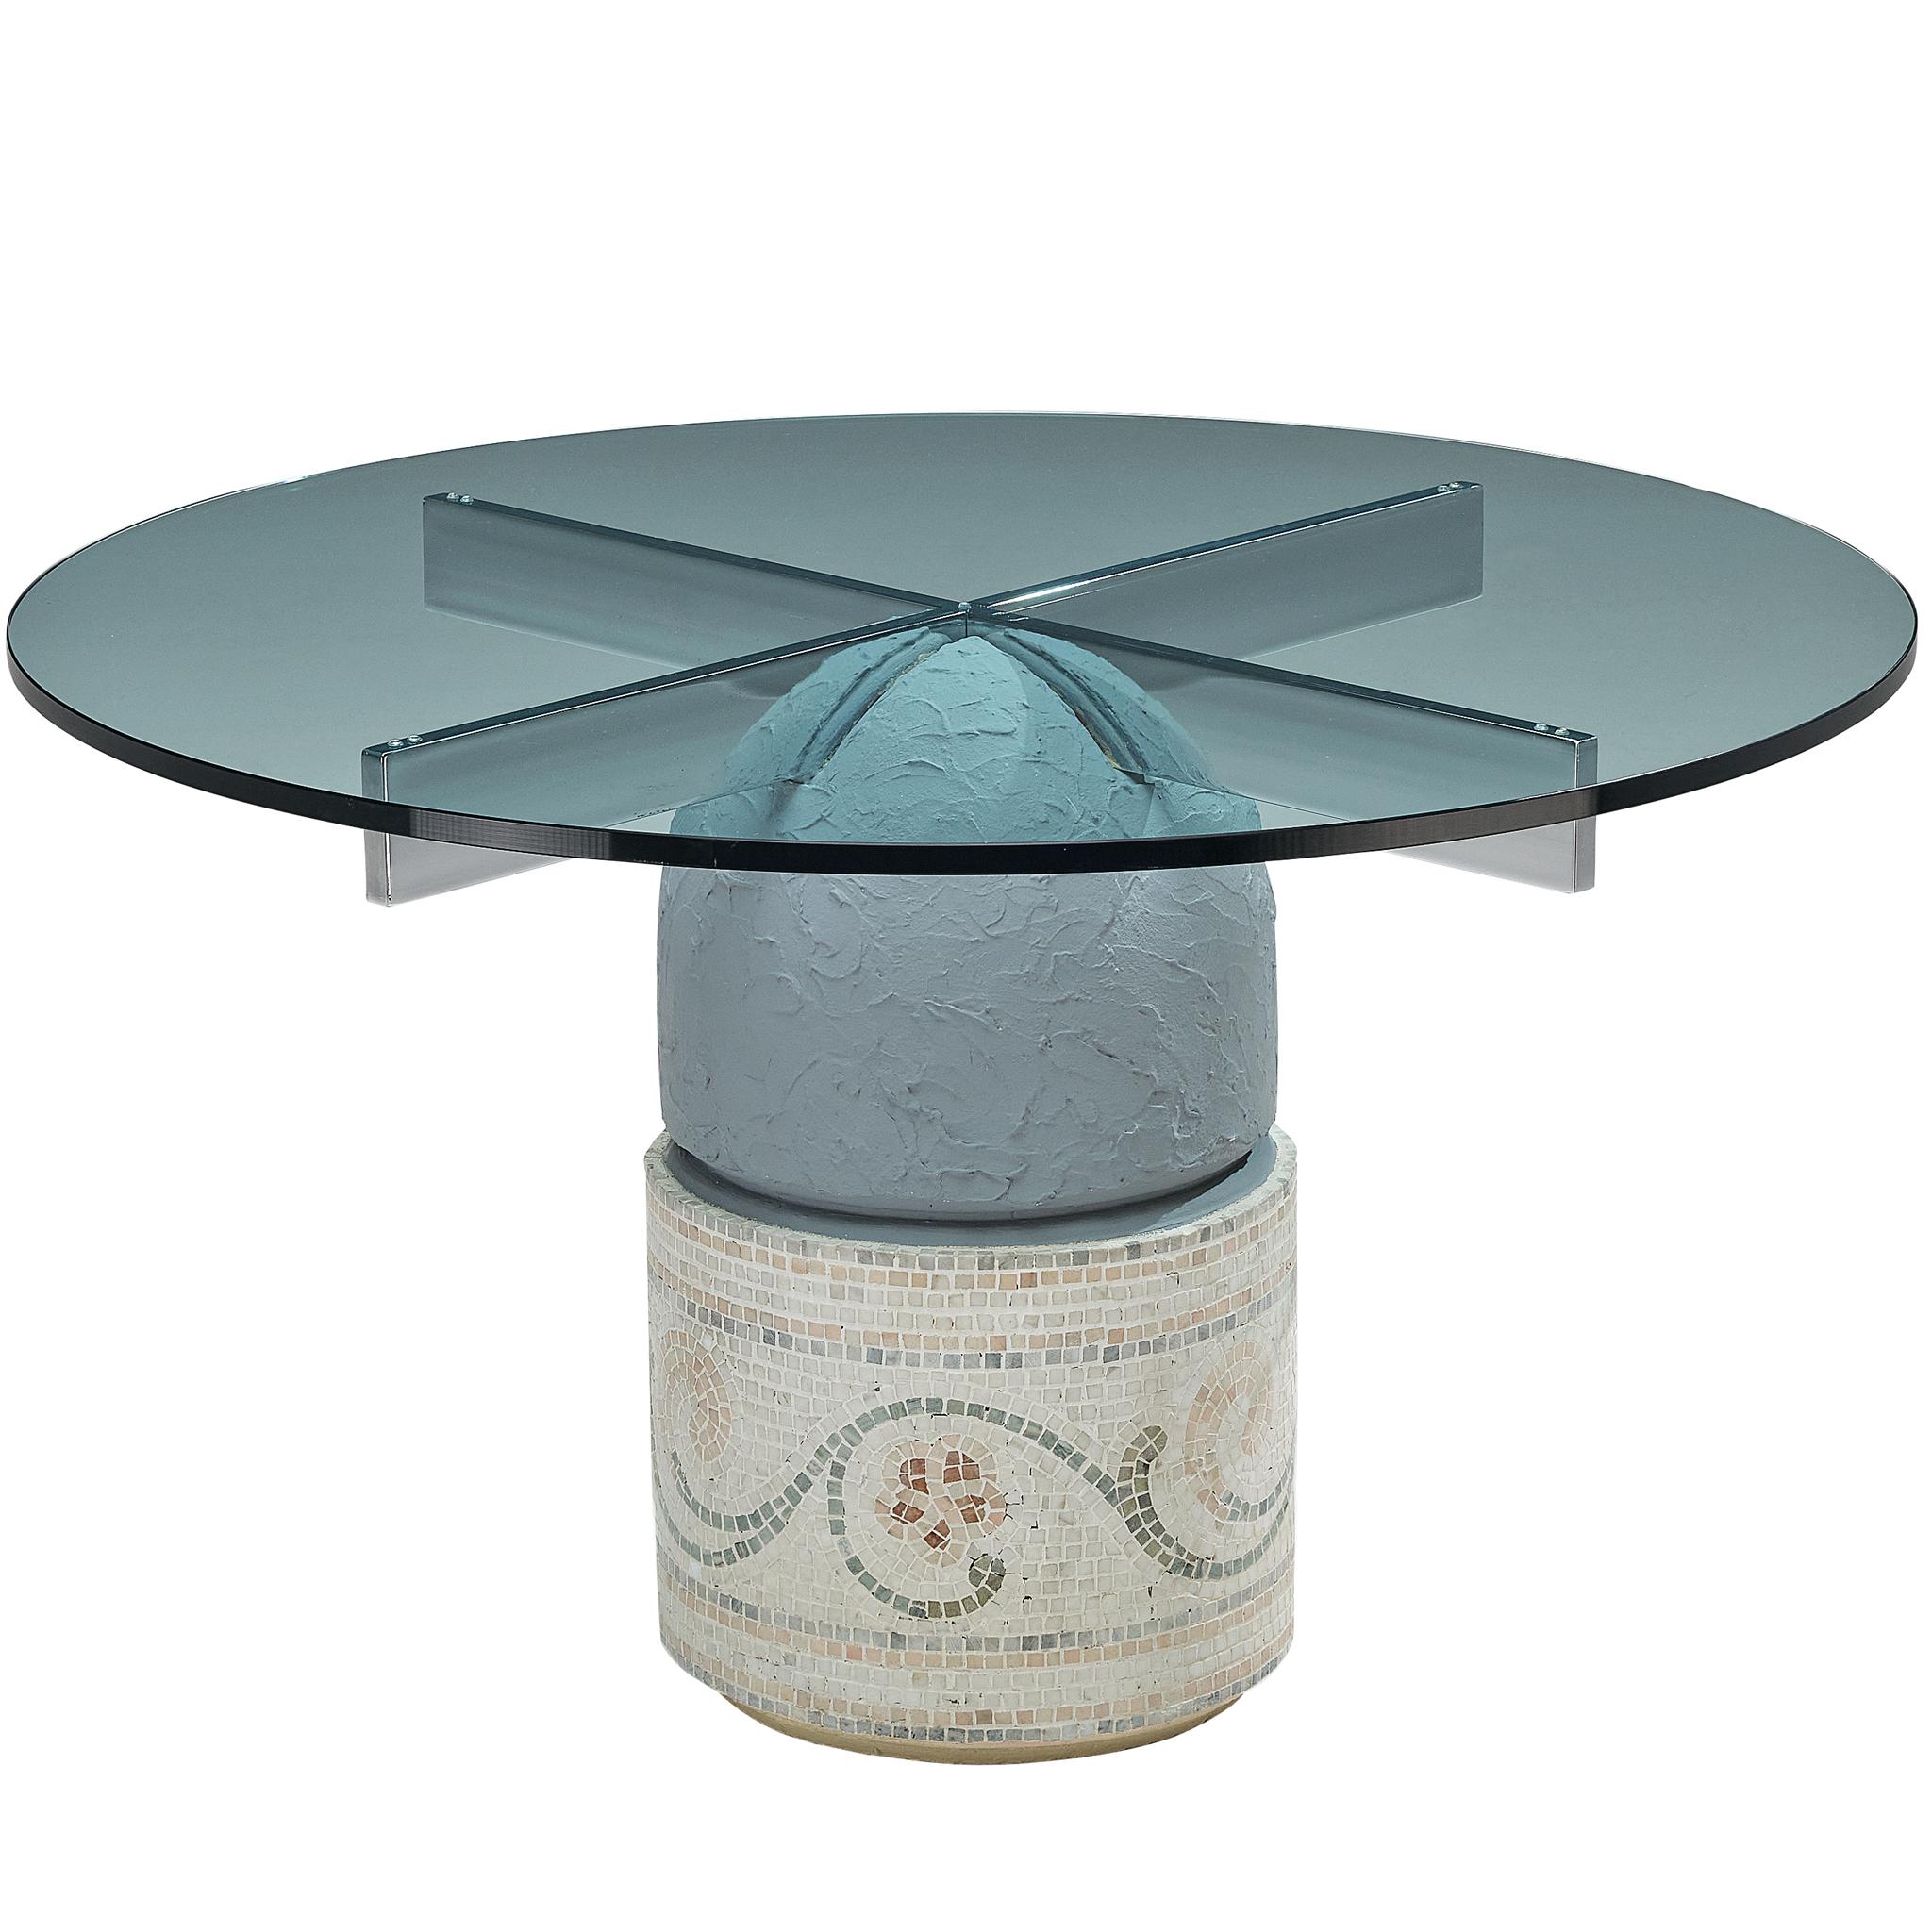 Giovanni Offredi for Saporiti 'Paracarro' Dining Table in Glass and Mosaic  For Sale